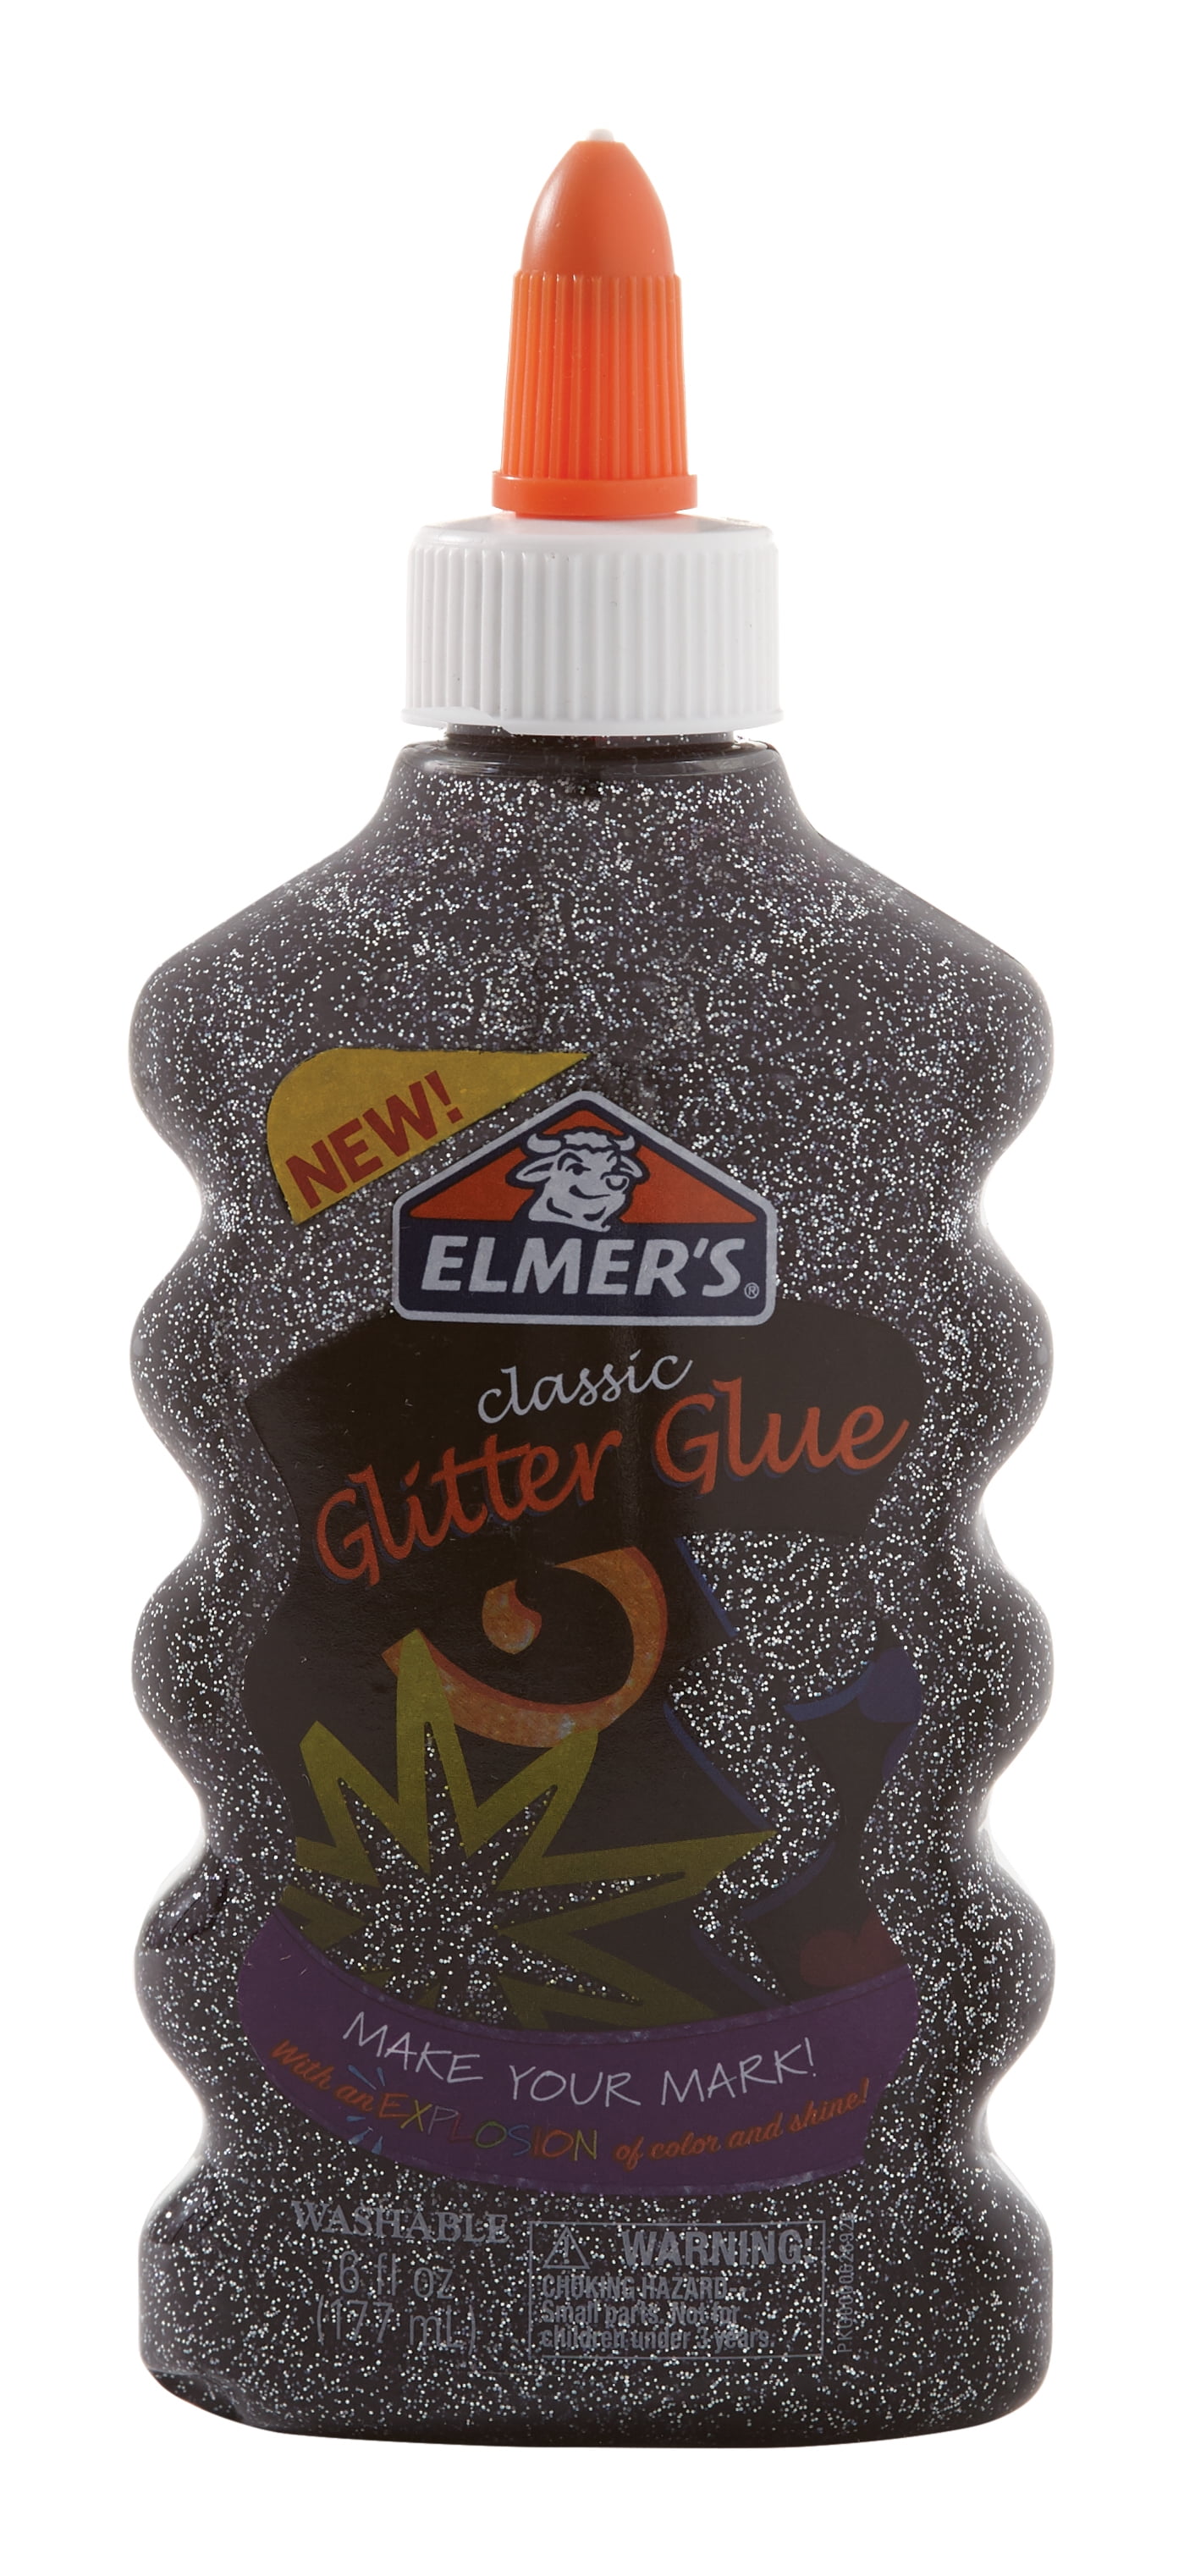 ELMERS GALLON GLITTER GLUE SLIME DIY * MIXING OVER 50 POUNDS OF SLIME! 